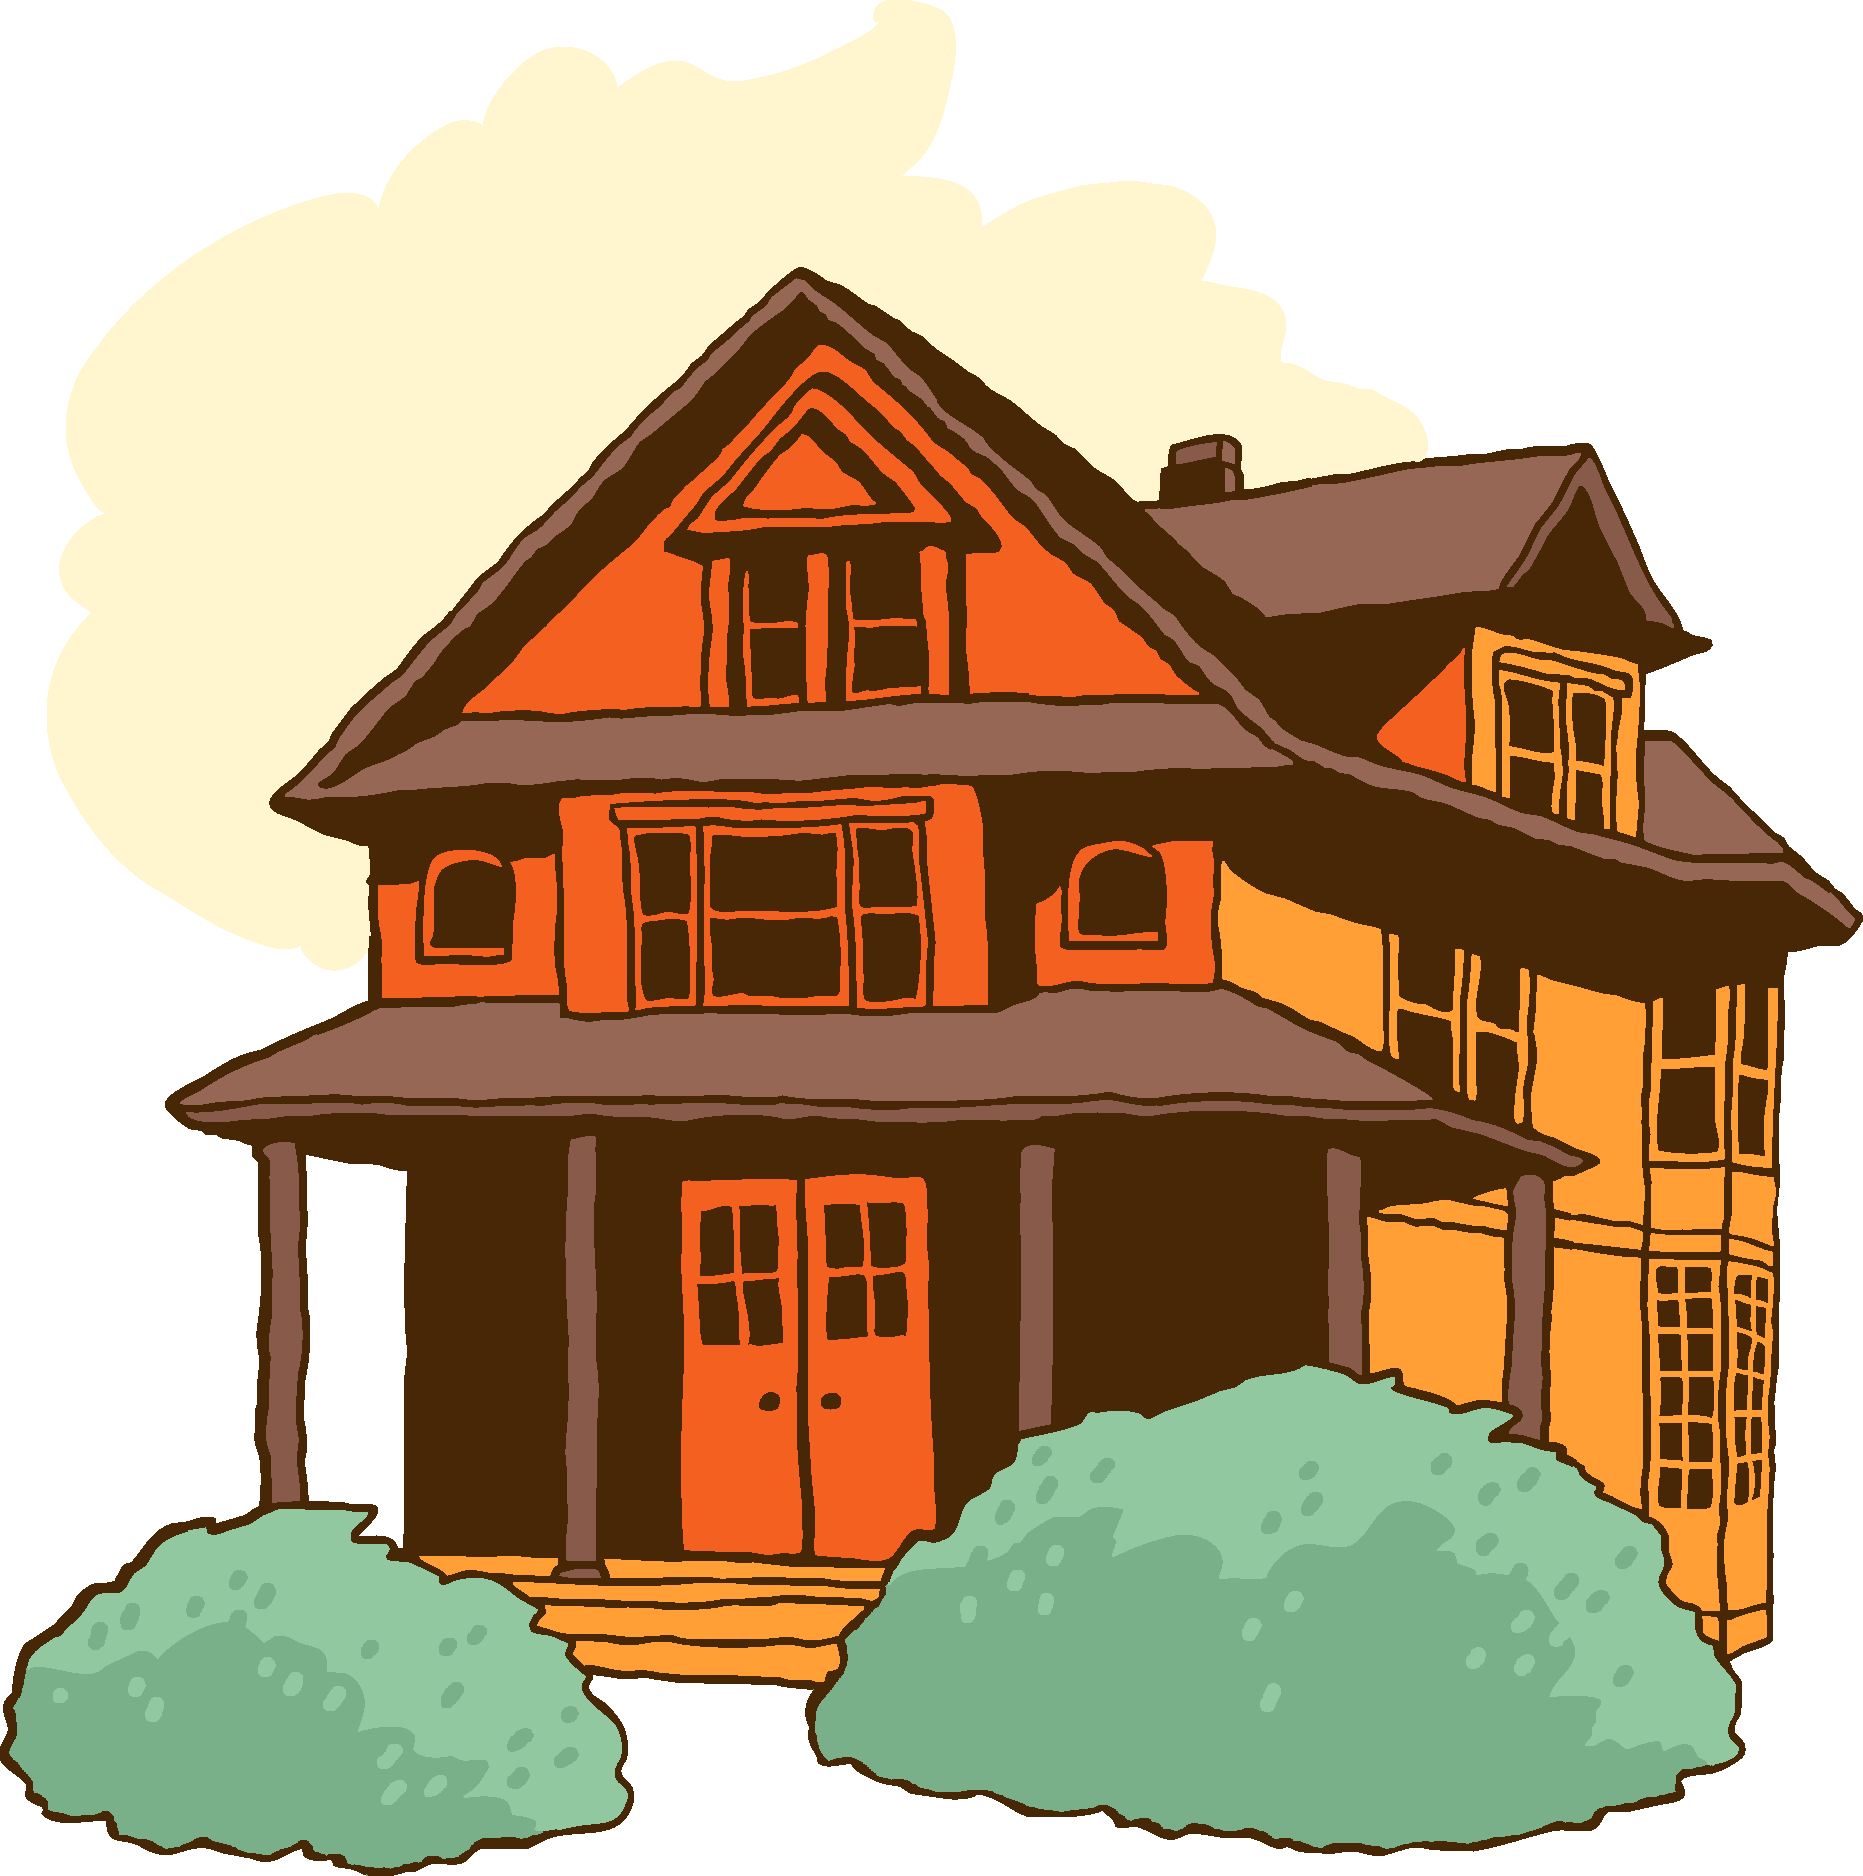 This is a cartoon version of a home in Kensington.